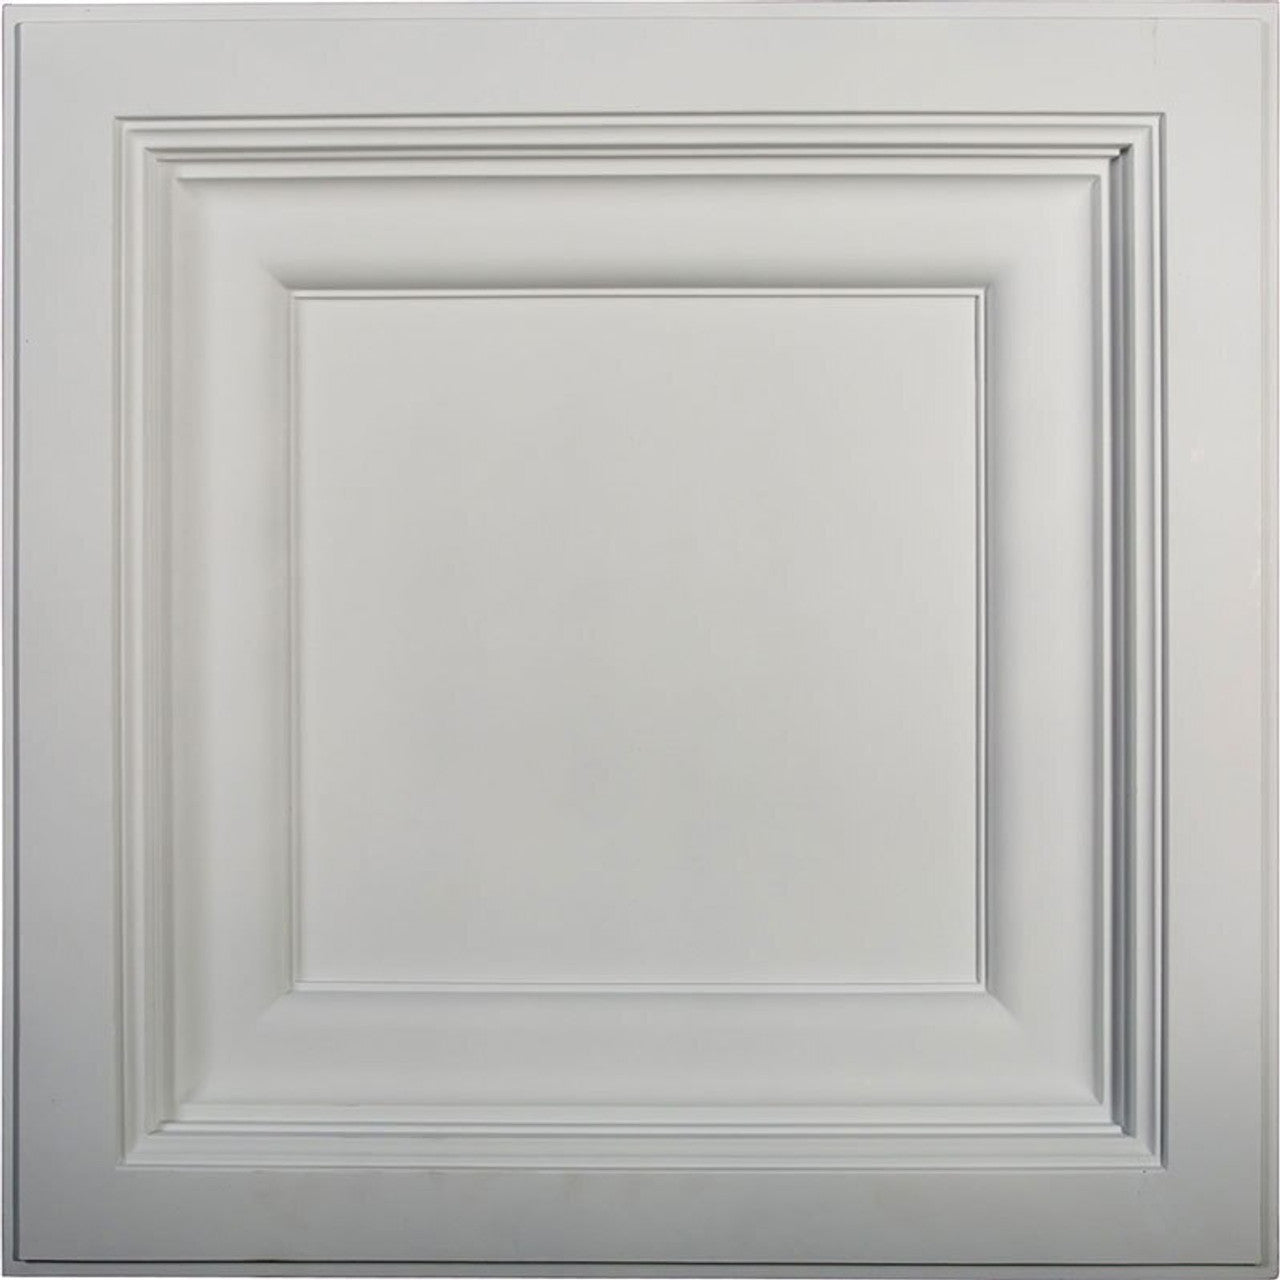 Classic - Urethane - Deep Coffered Drop Ceiling Tile - 24"x24"